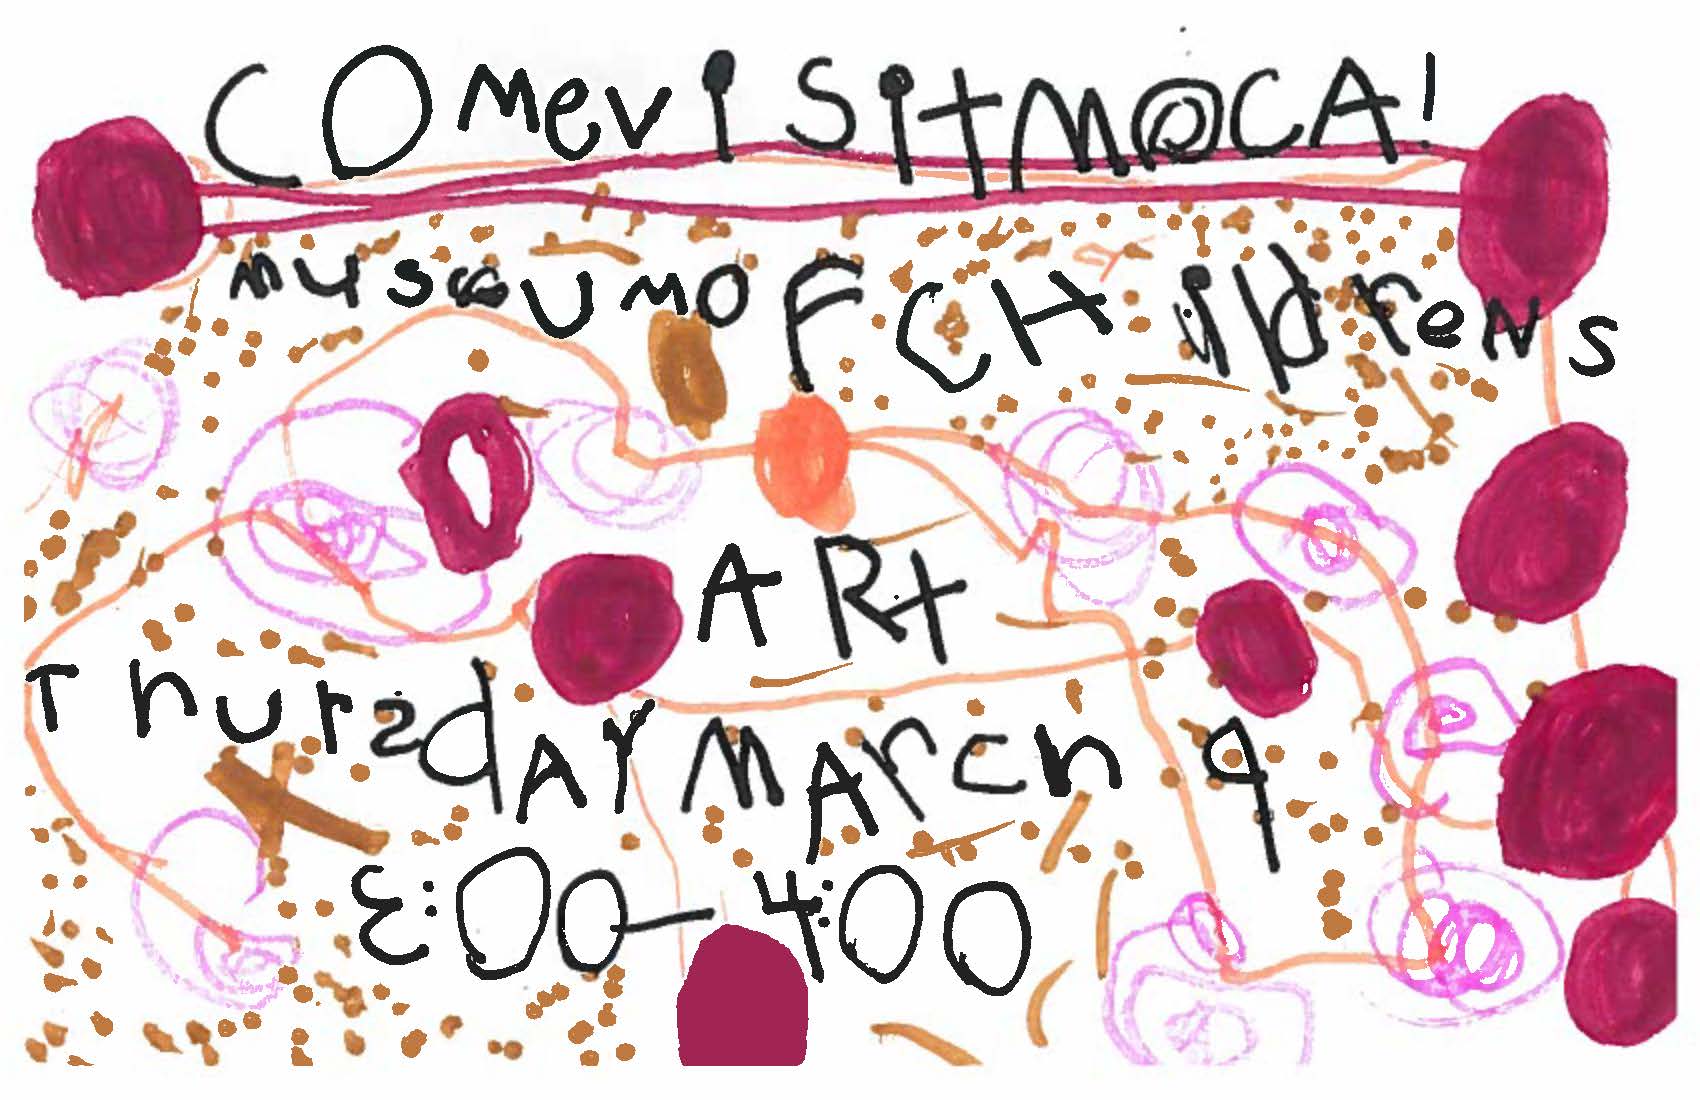 Children's invitation to the Museum of Art exhibit.  Child's art with the words draw in black marker "Come Visit MOCA!  Museum of Children's Art.  Thursday March 9 3:00 to 4:00."